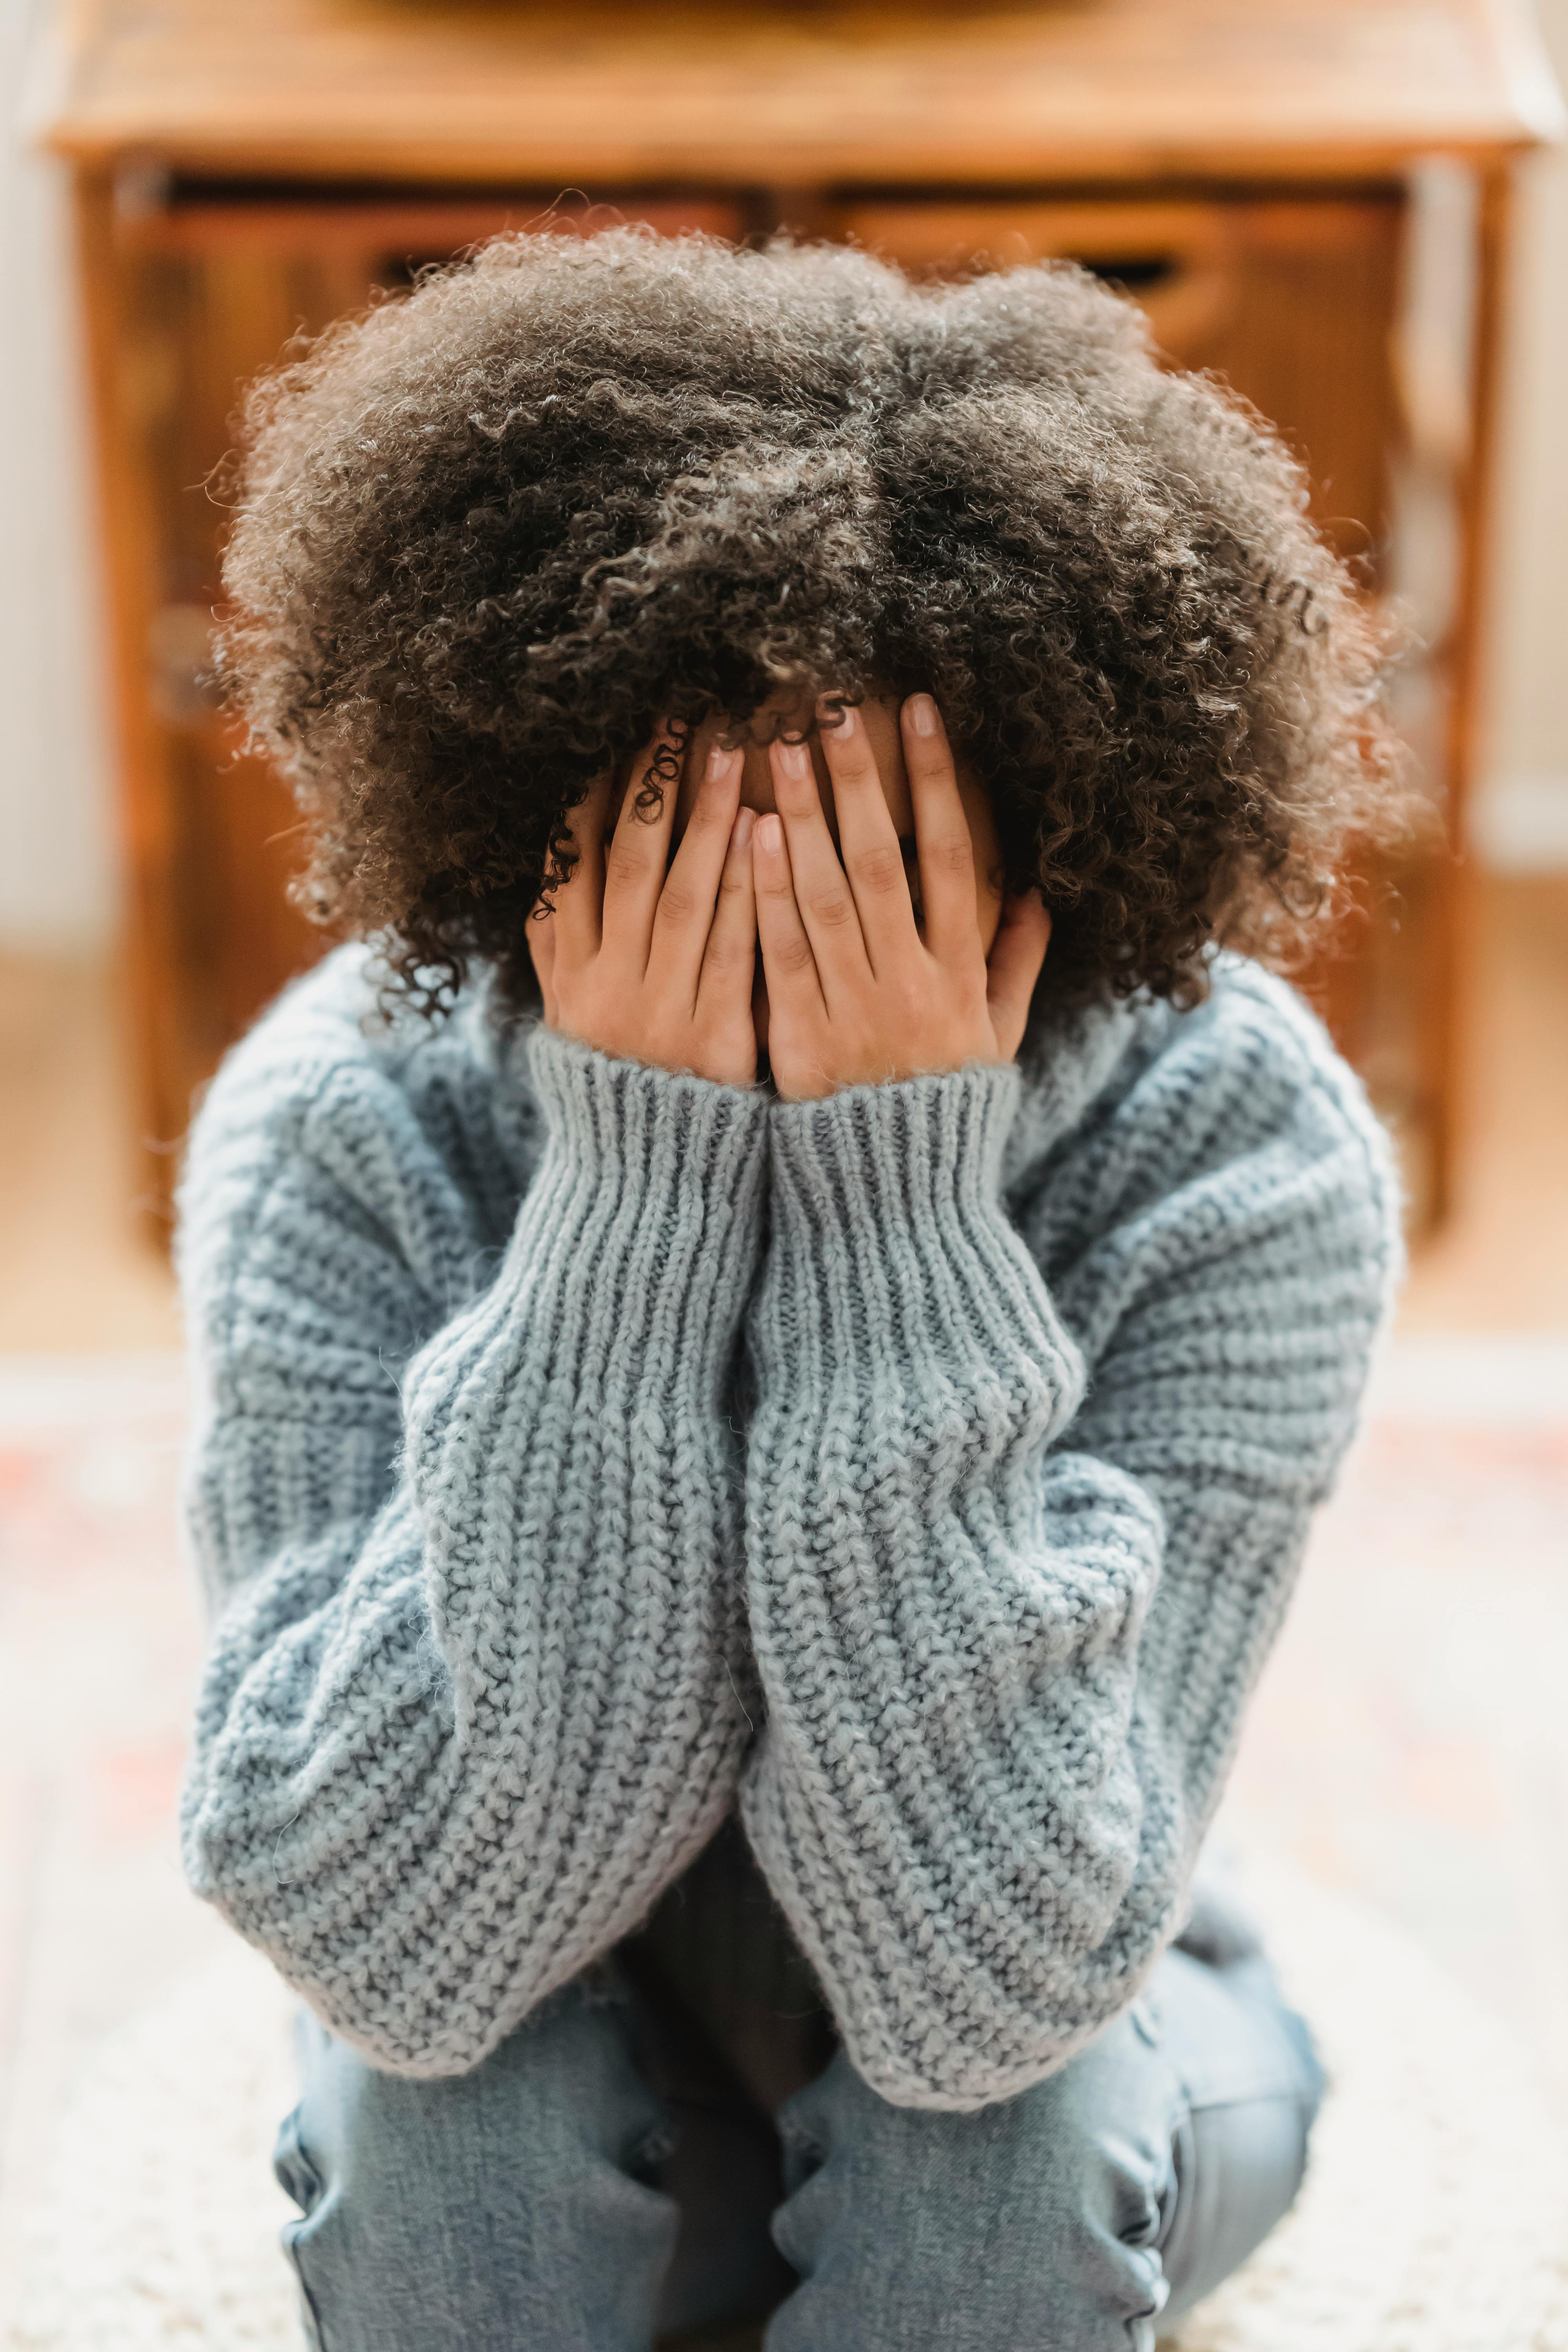 An upset woman sitting with her face covered | Source: Pexels